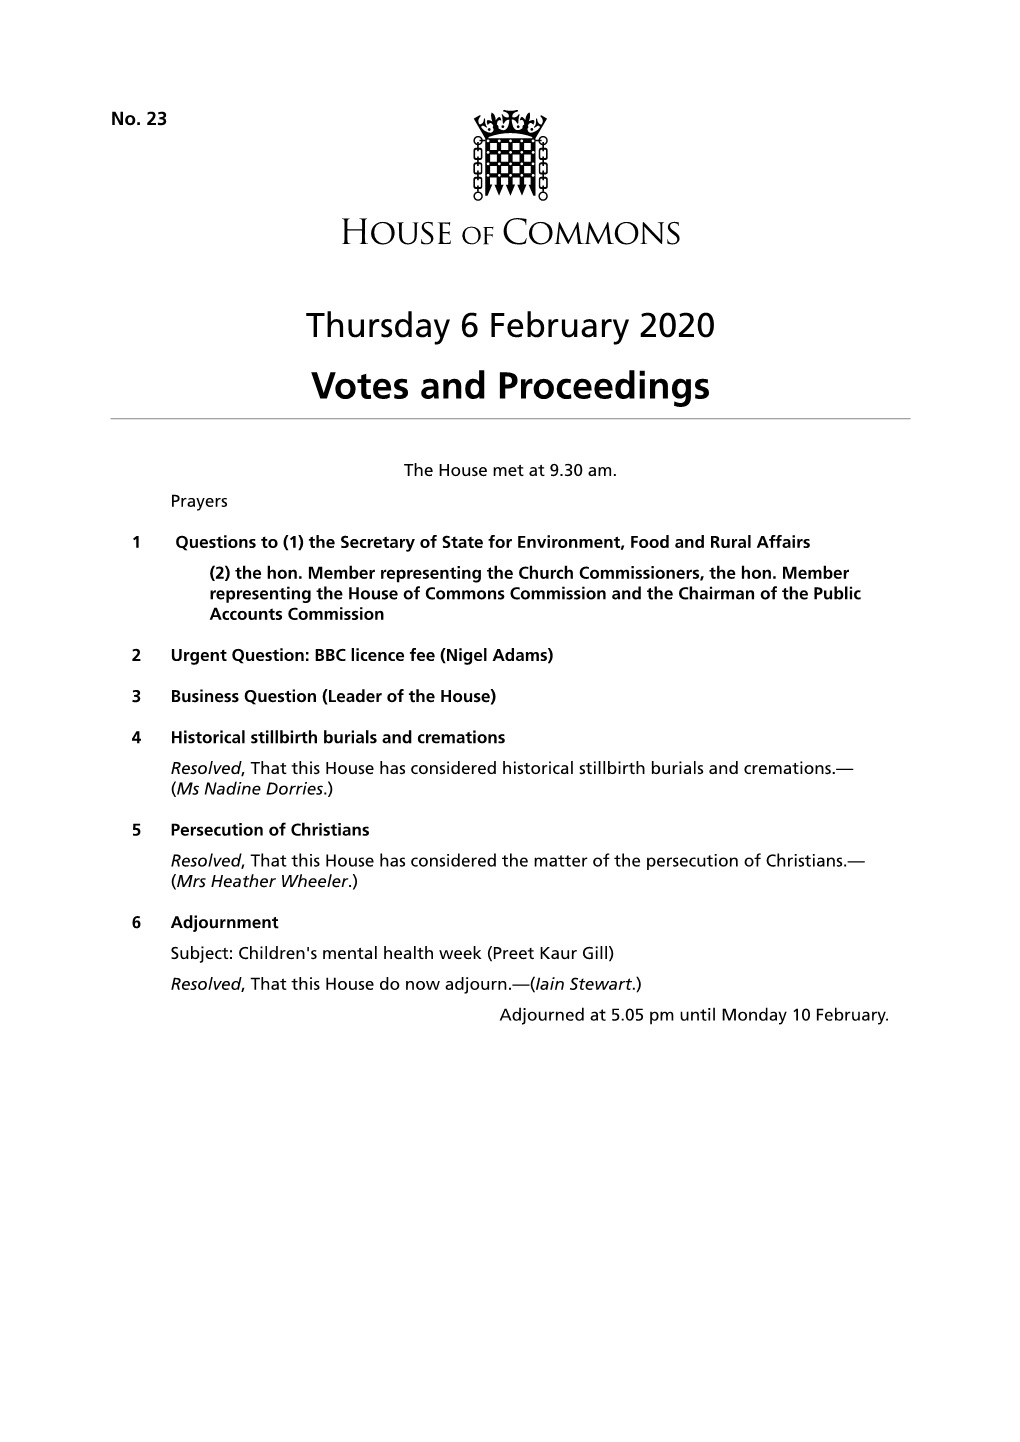 Votes and Proceedings for 6 Feb 2020